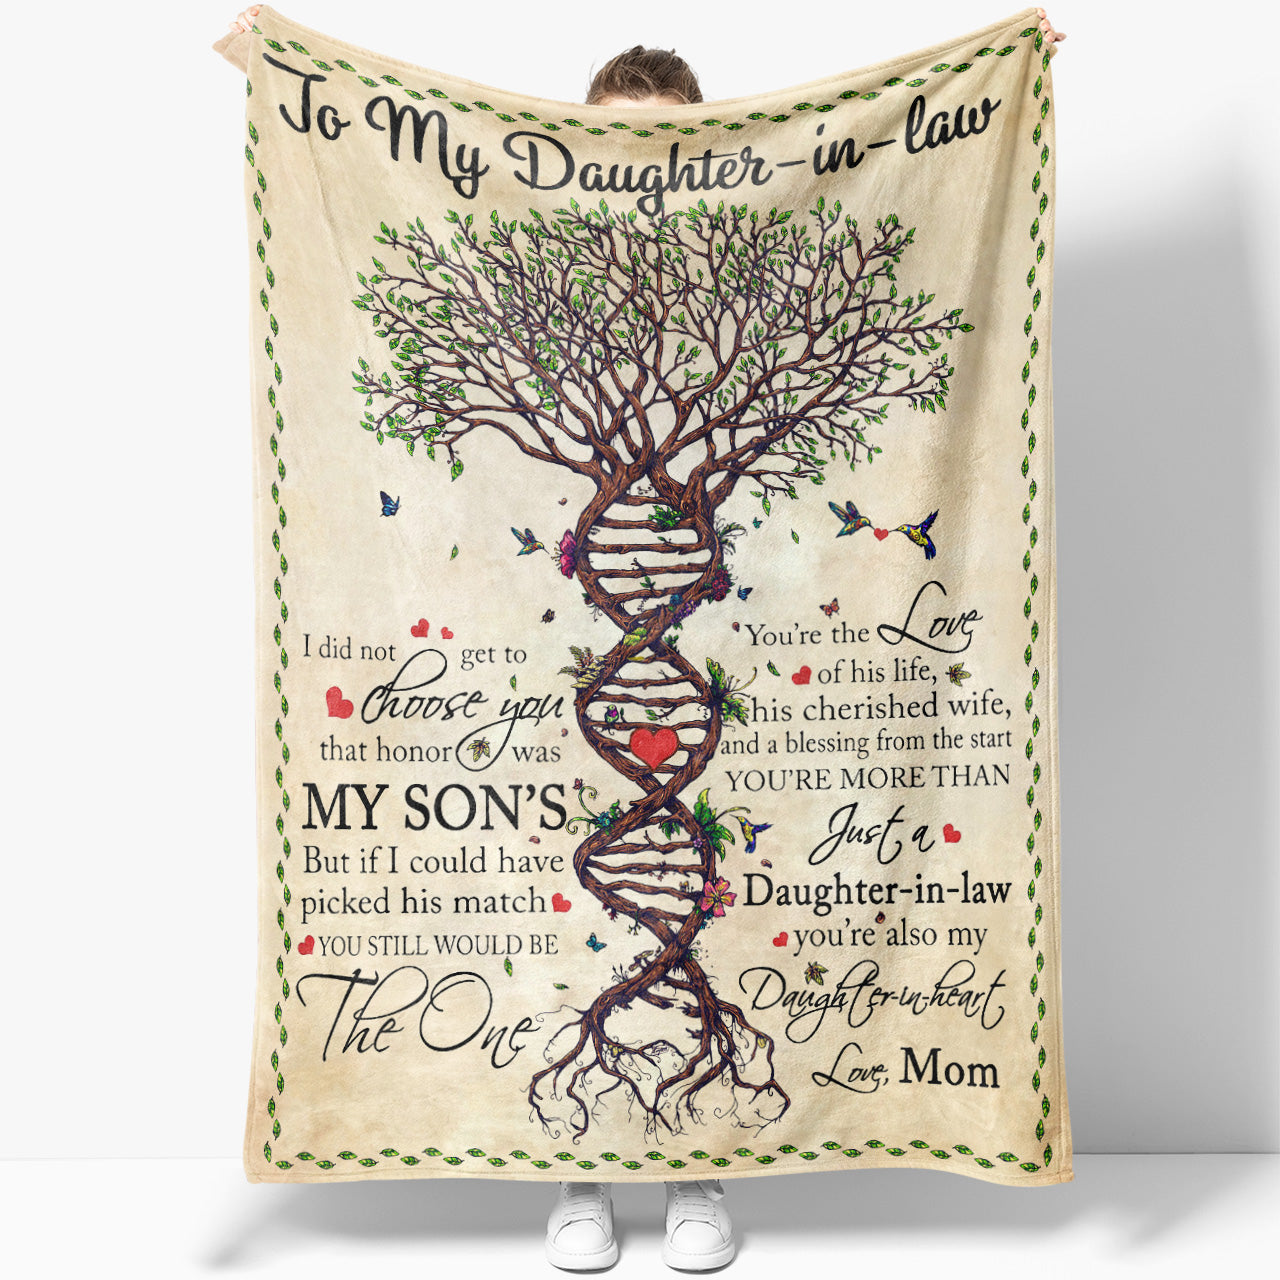 Blanket Gift Ideas For Daughter in Law, Custom Personalized Blanket Gift, Tree of Life